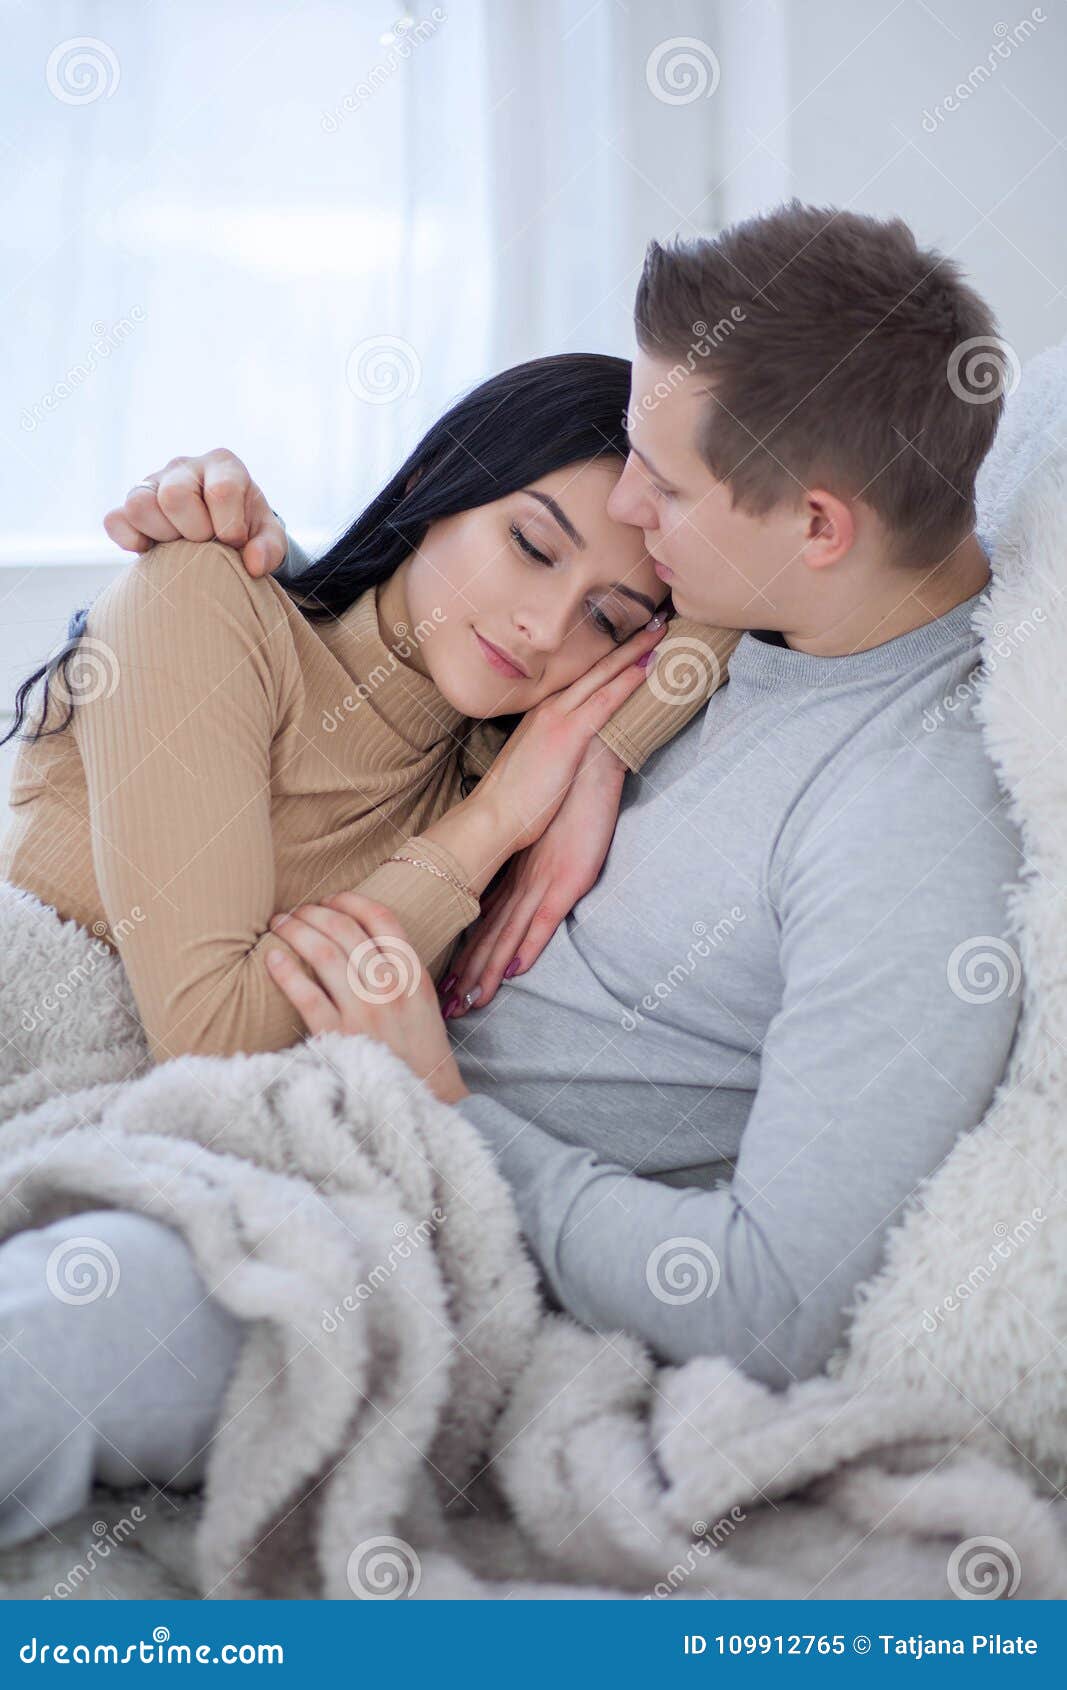 Couple in Love Hugging and Kissing at Home Stock Image - Image of ...